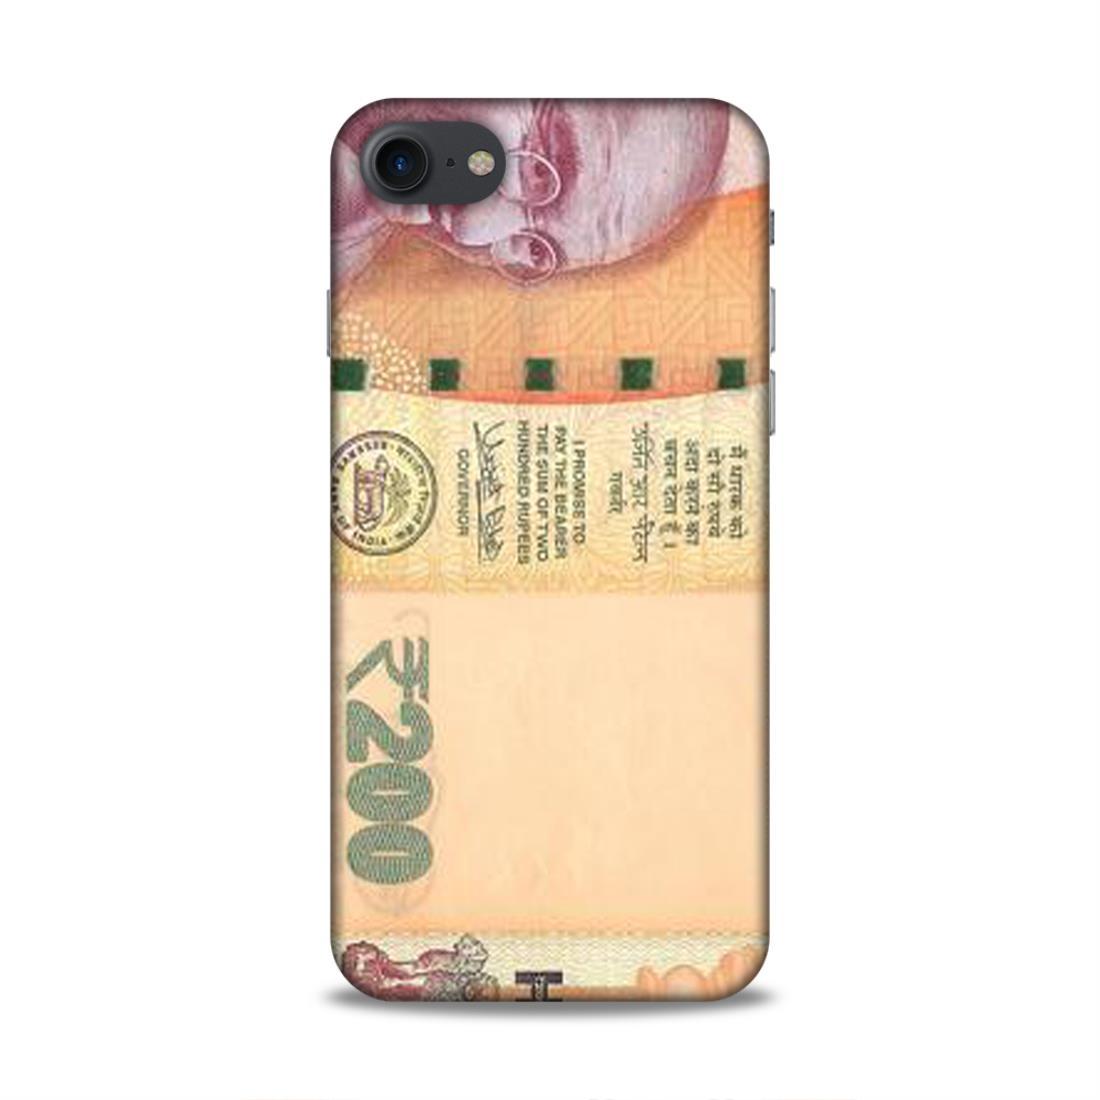 Rs 200 Currency Note iPhone 8 Phone Case Cover